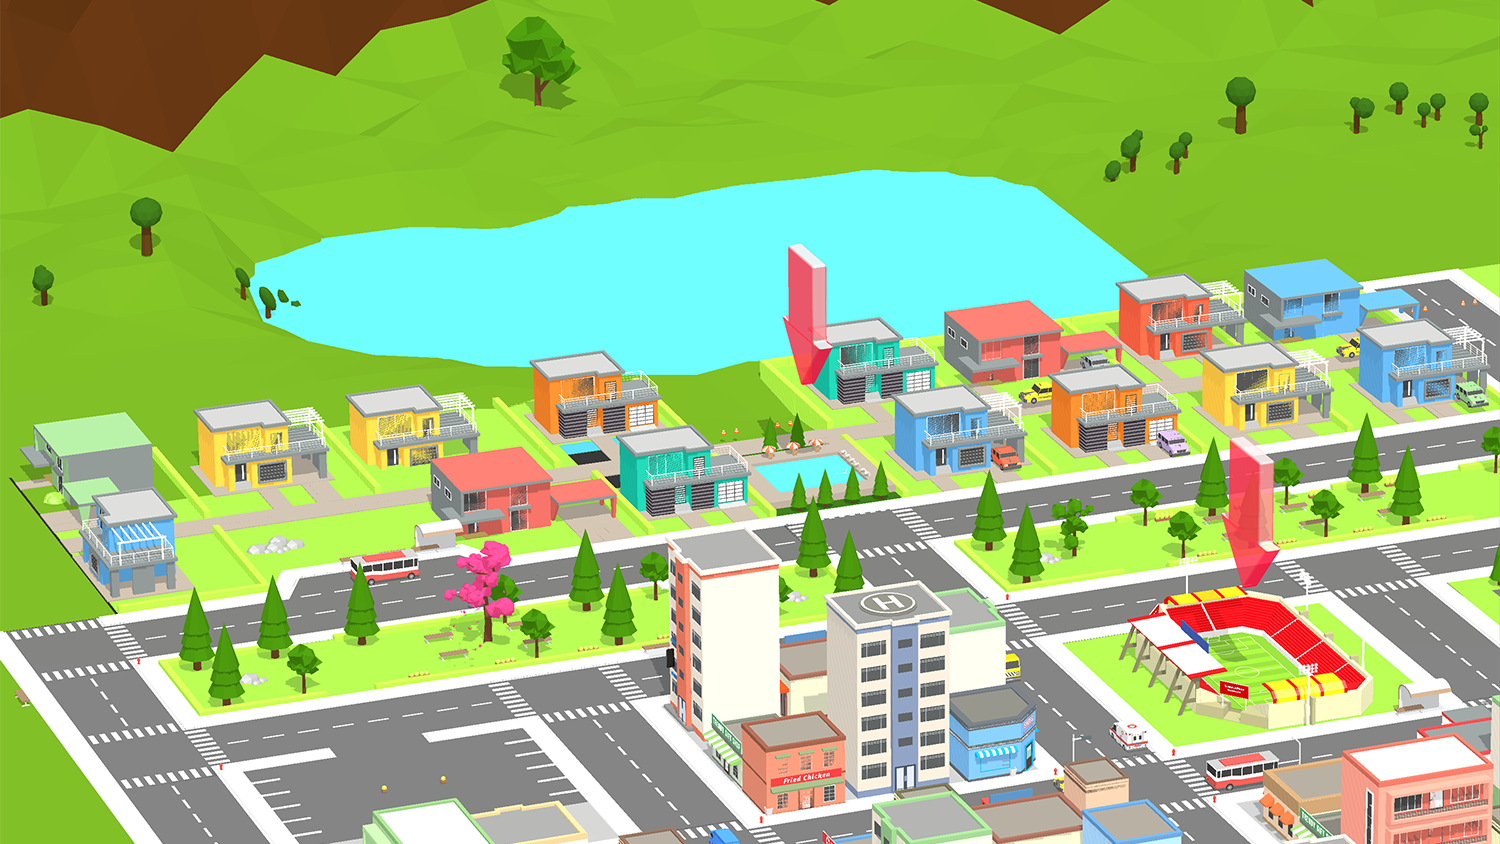 game interface that shows a range of colorful buildings in an imaginary city